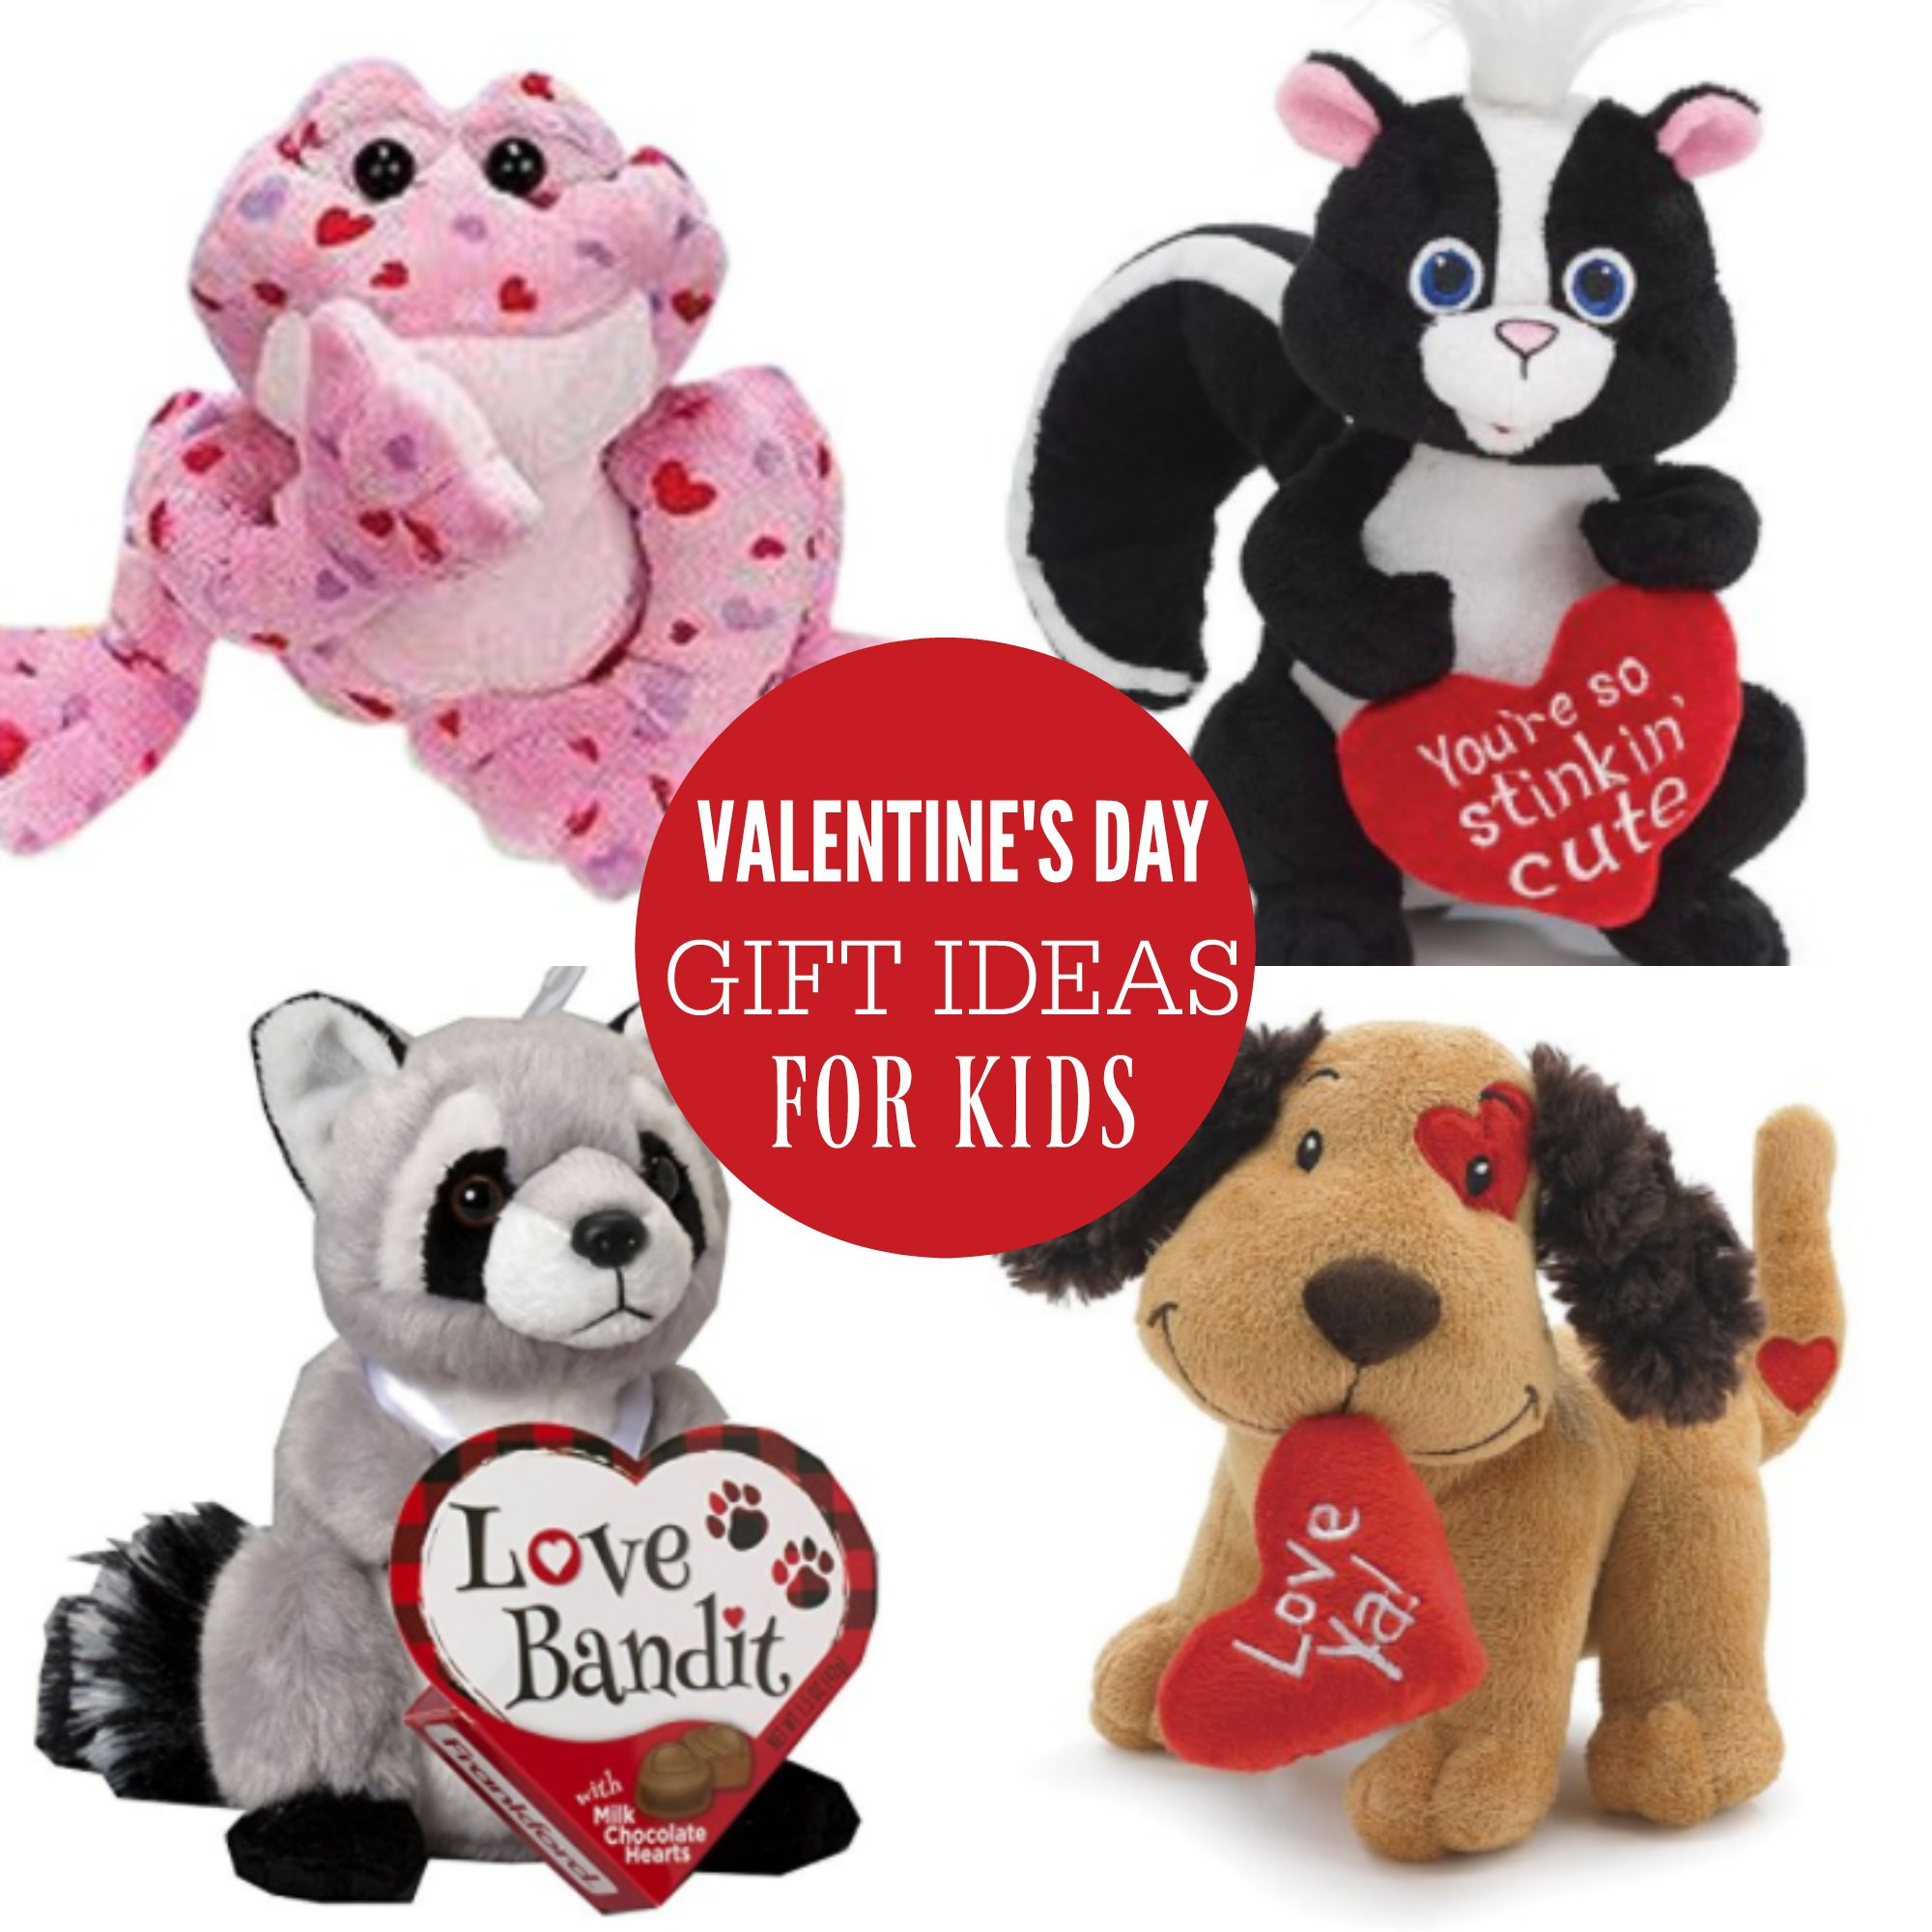 Gift Ideas For Kids For Valentines Day
 Valentine Gift ideas for Kids That they will love